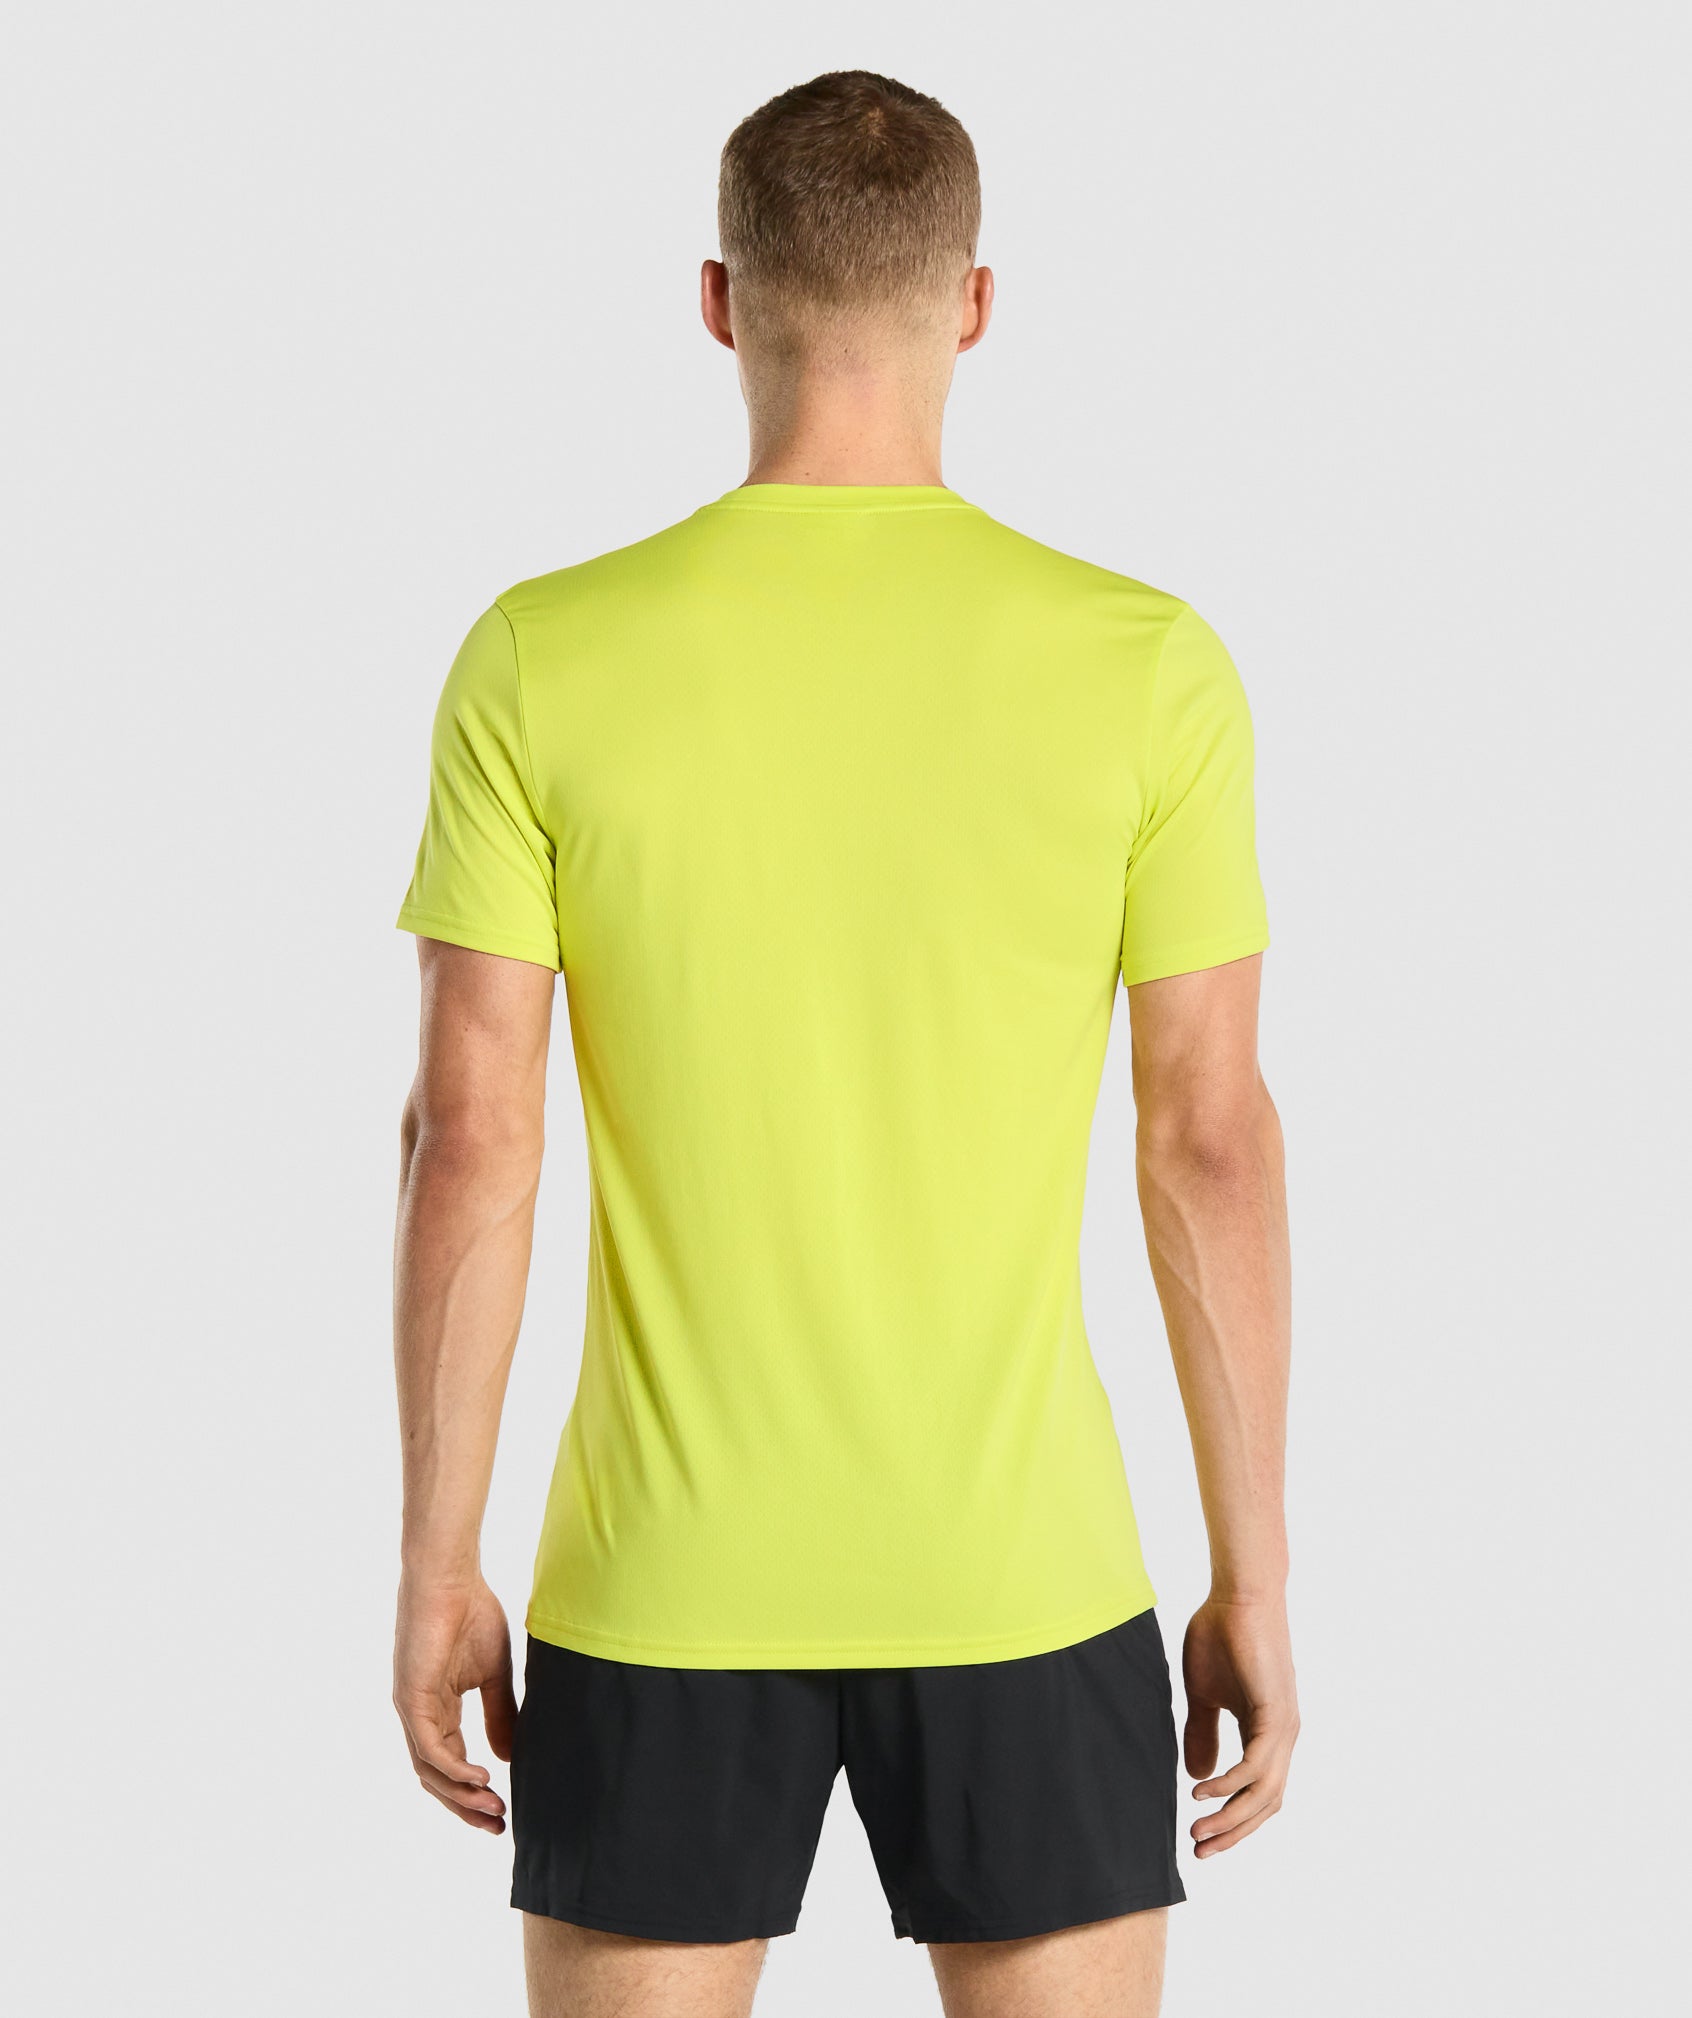 Arrival T-Shirt in Yellow - view 2